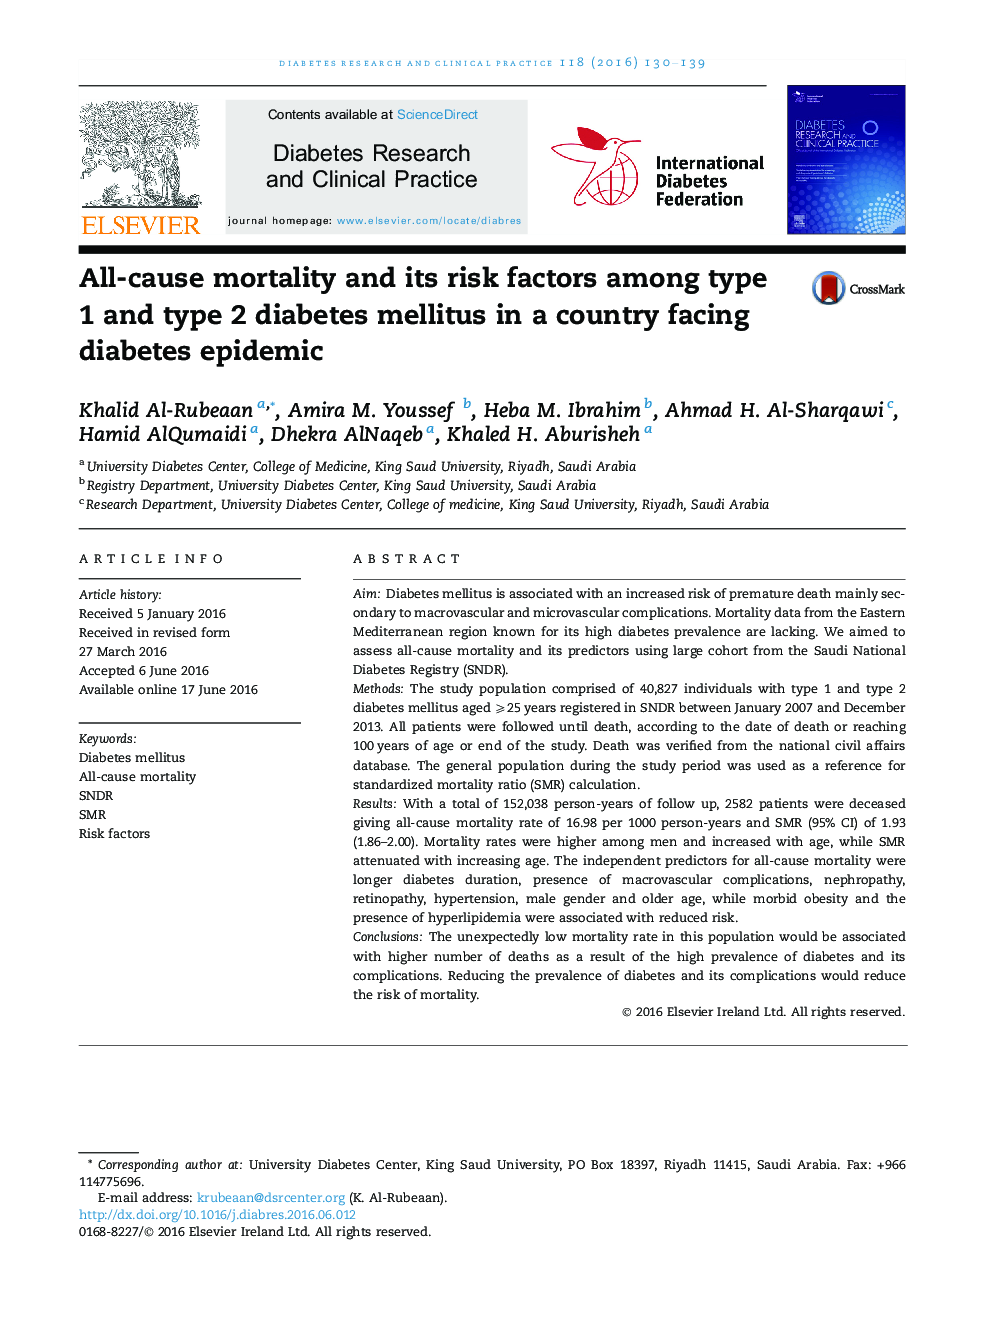 All-cause mortality and its risk factors among type 1 and type 2 diabetes mellitus in a country facing diabetes epidemic